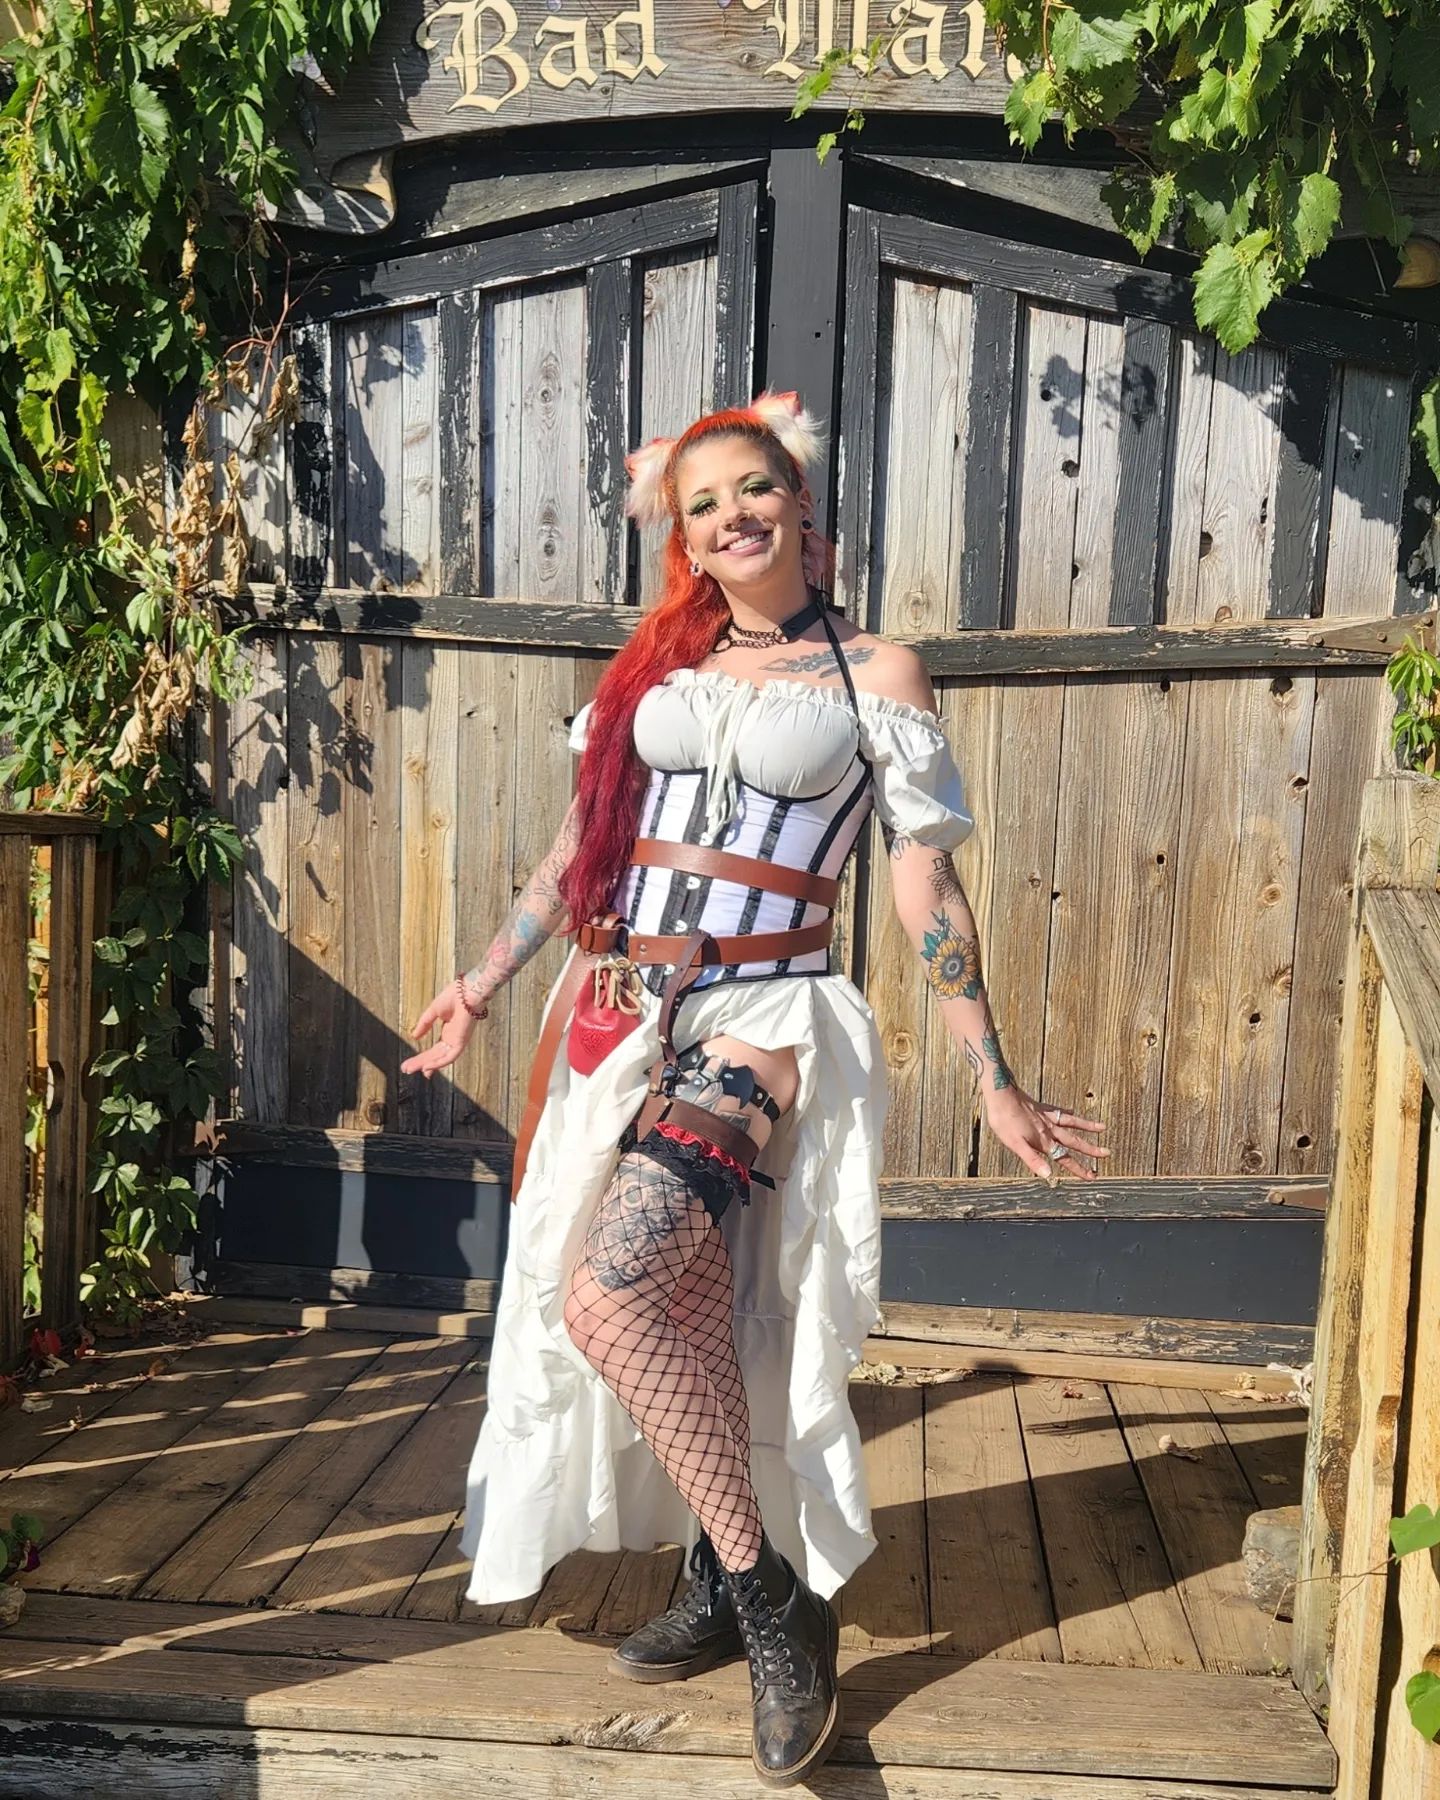 First Minnesota Ren fest in the books! Had one of the best days I've ever had ❤️❤️